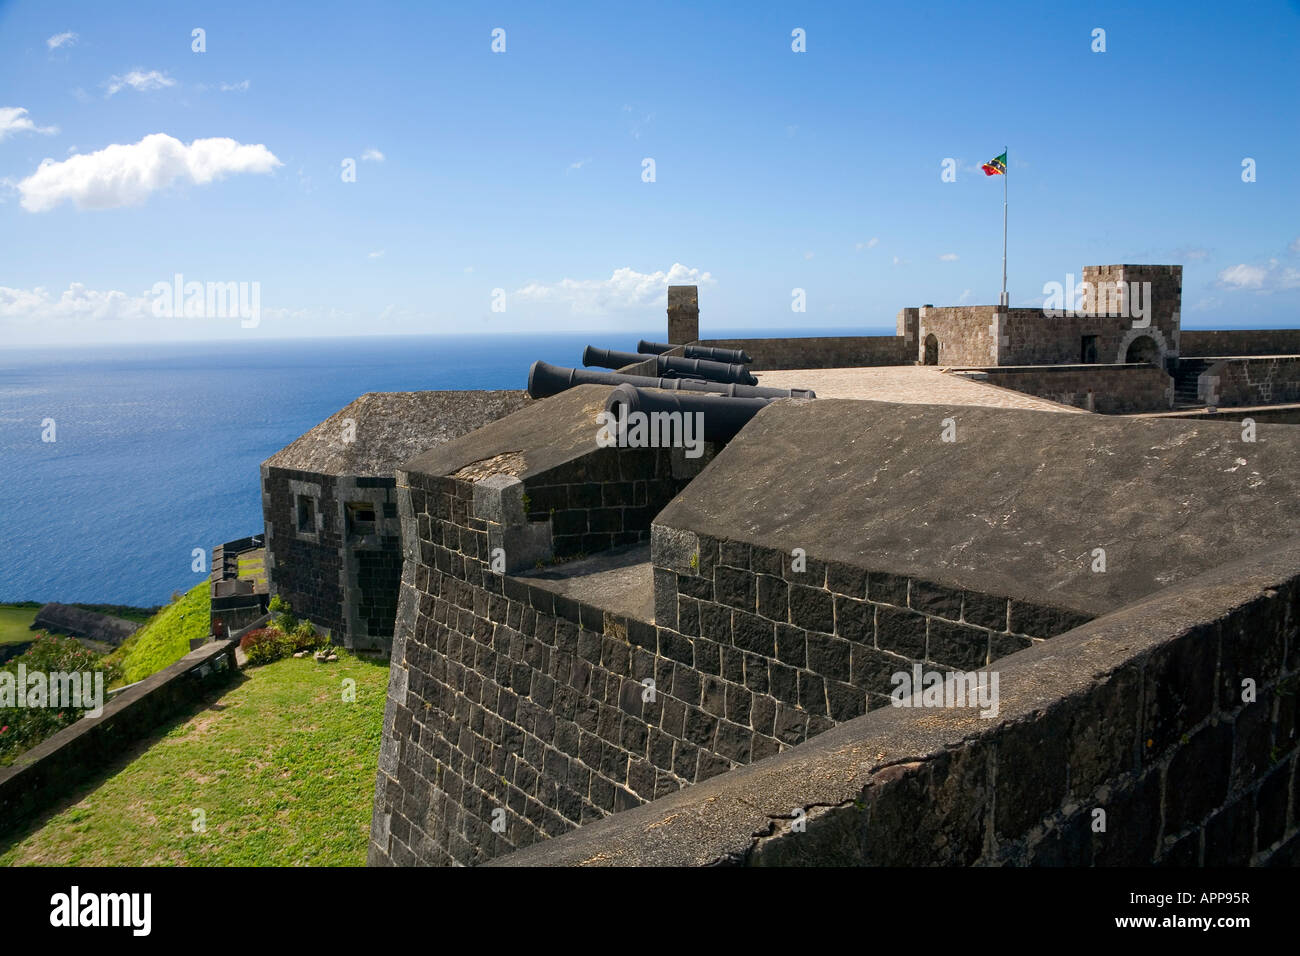 Brimstone Hill Fortress at St Kitts in the Caribbean Stock Photo